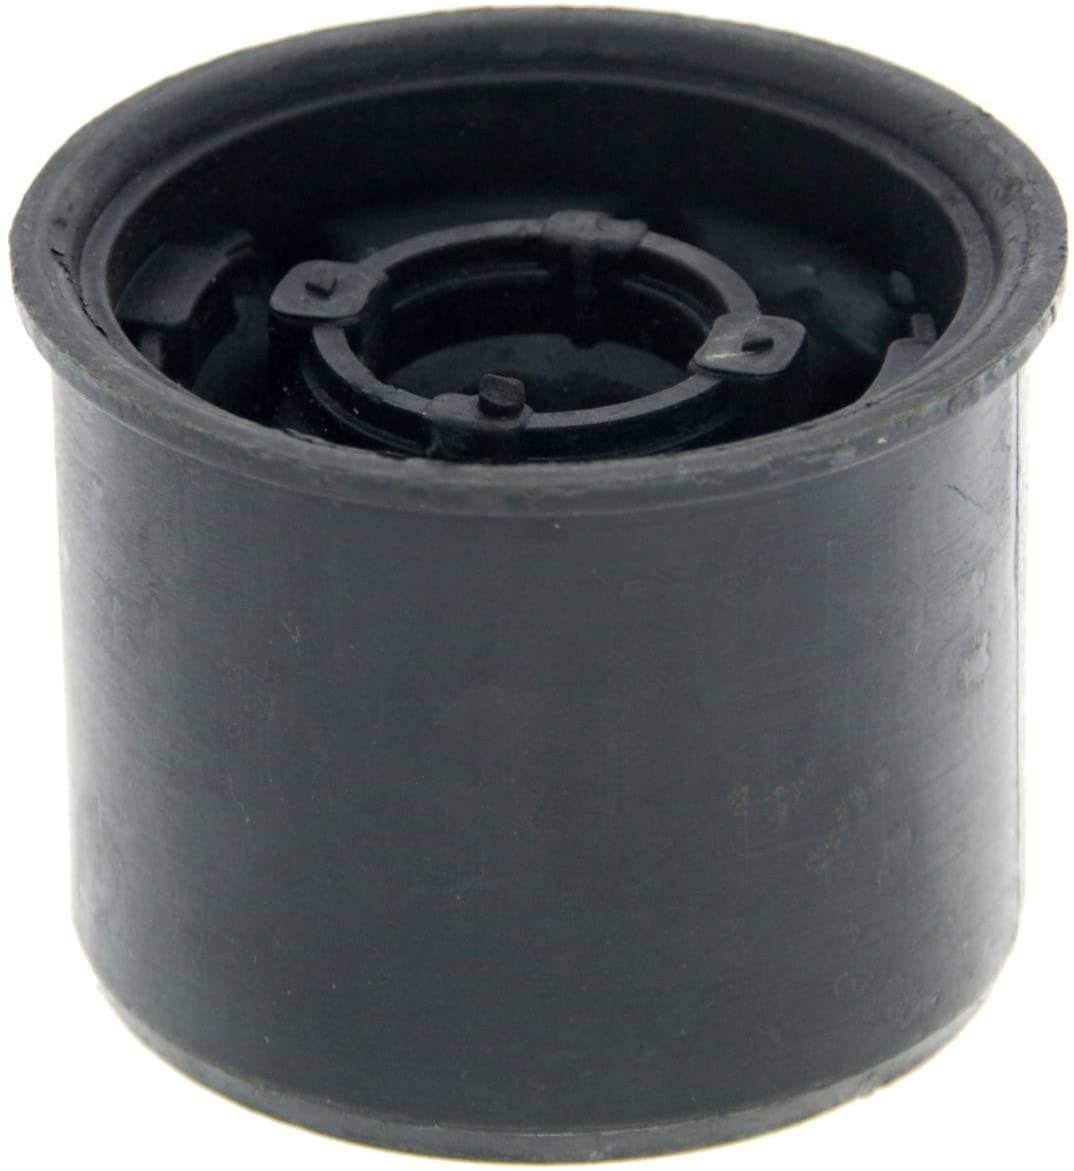 51395Swae01 - Rear Arm Bushing (for Front Arm) For Honda - Febest